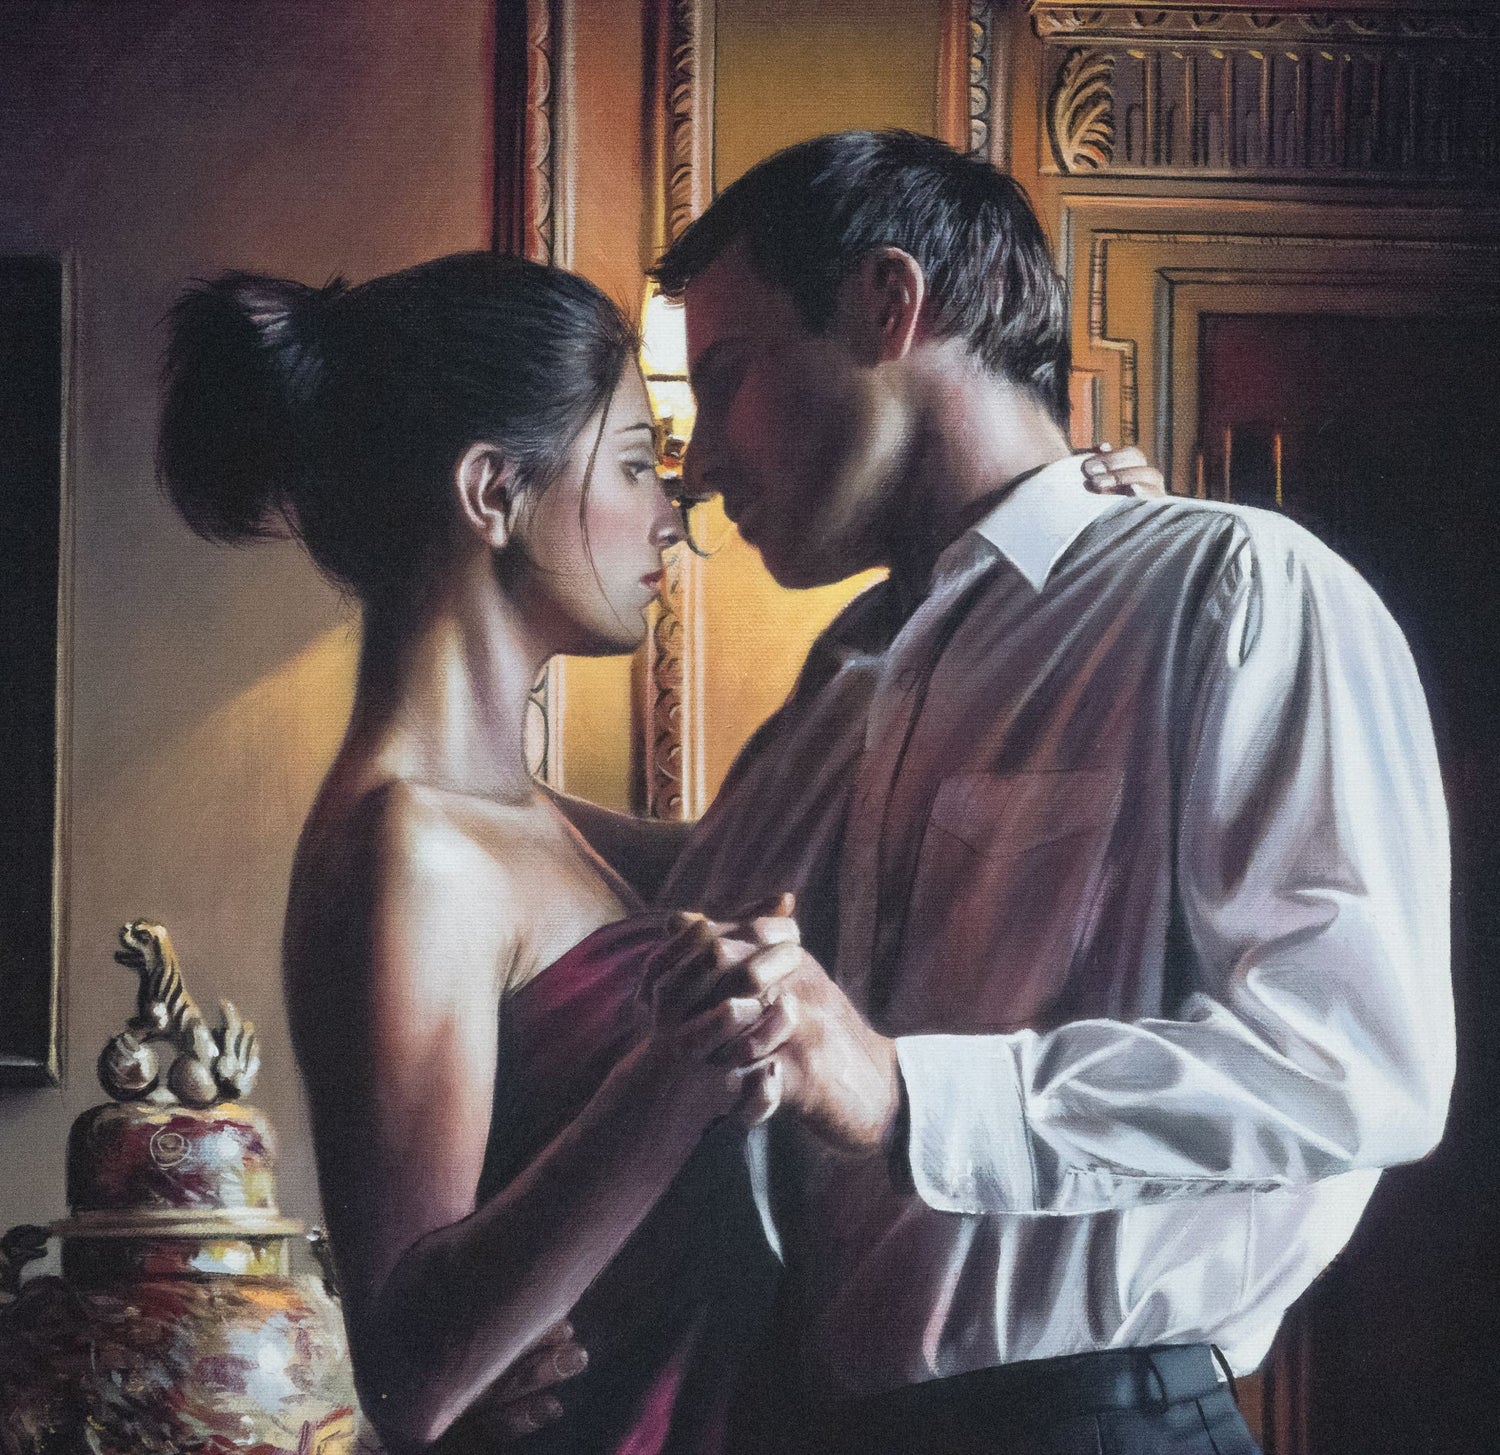 Rob Hefferan collection from Artworx Gallery